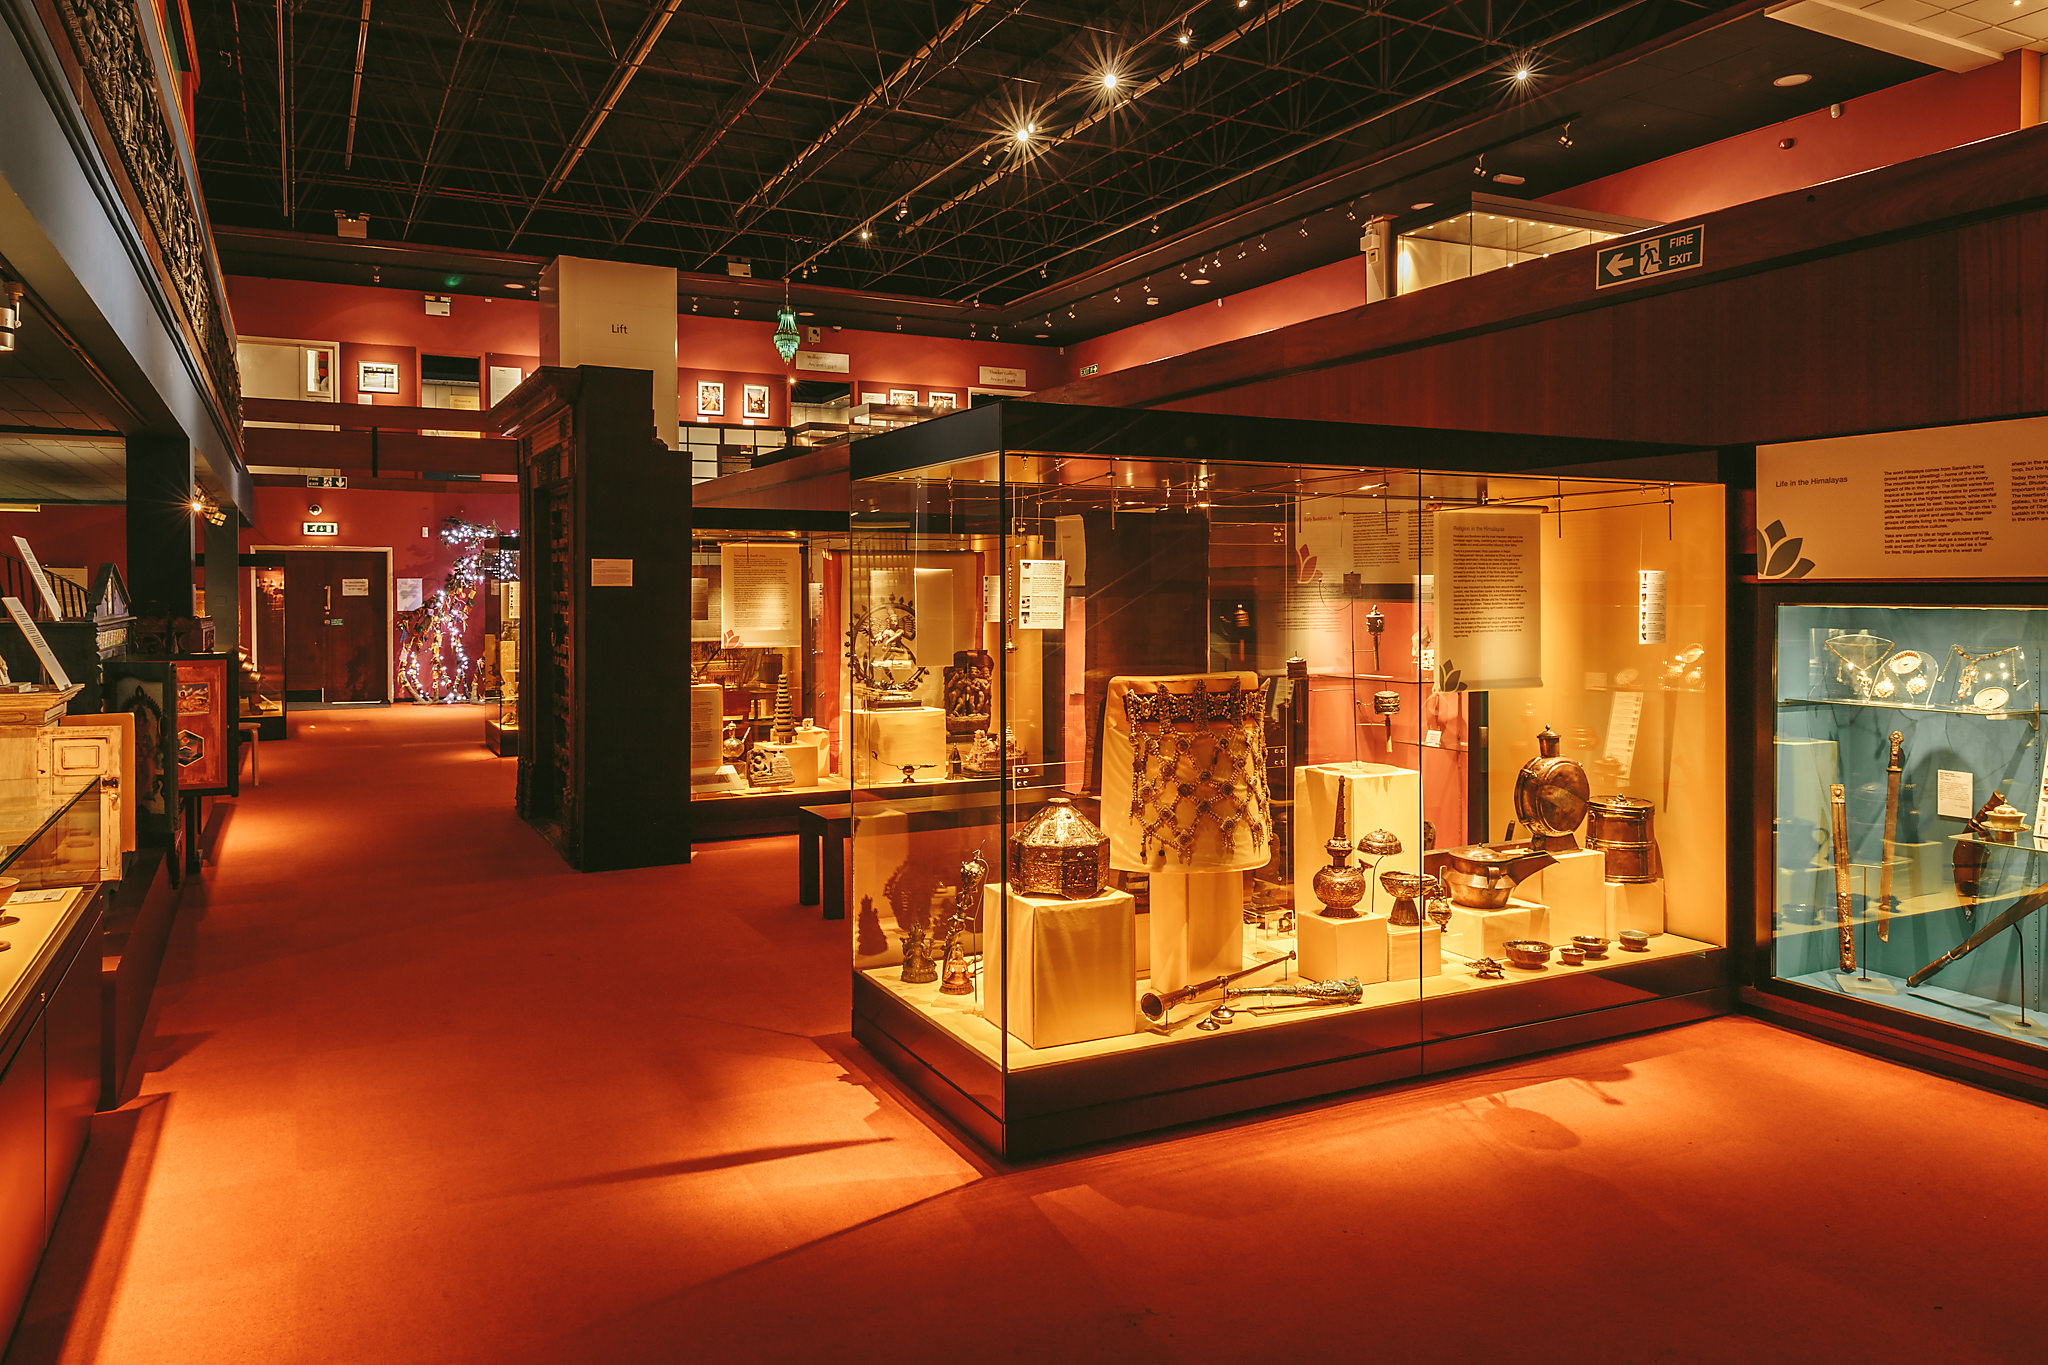 View down the length of the gallery with the Himalayan displays in front and Indian displays behind.